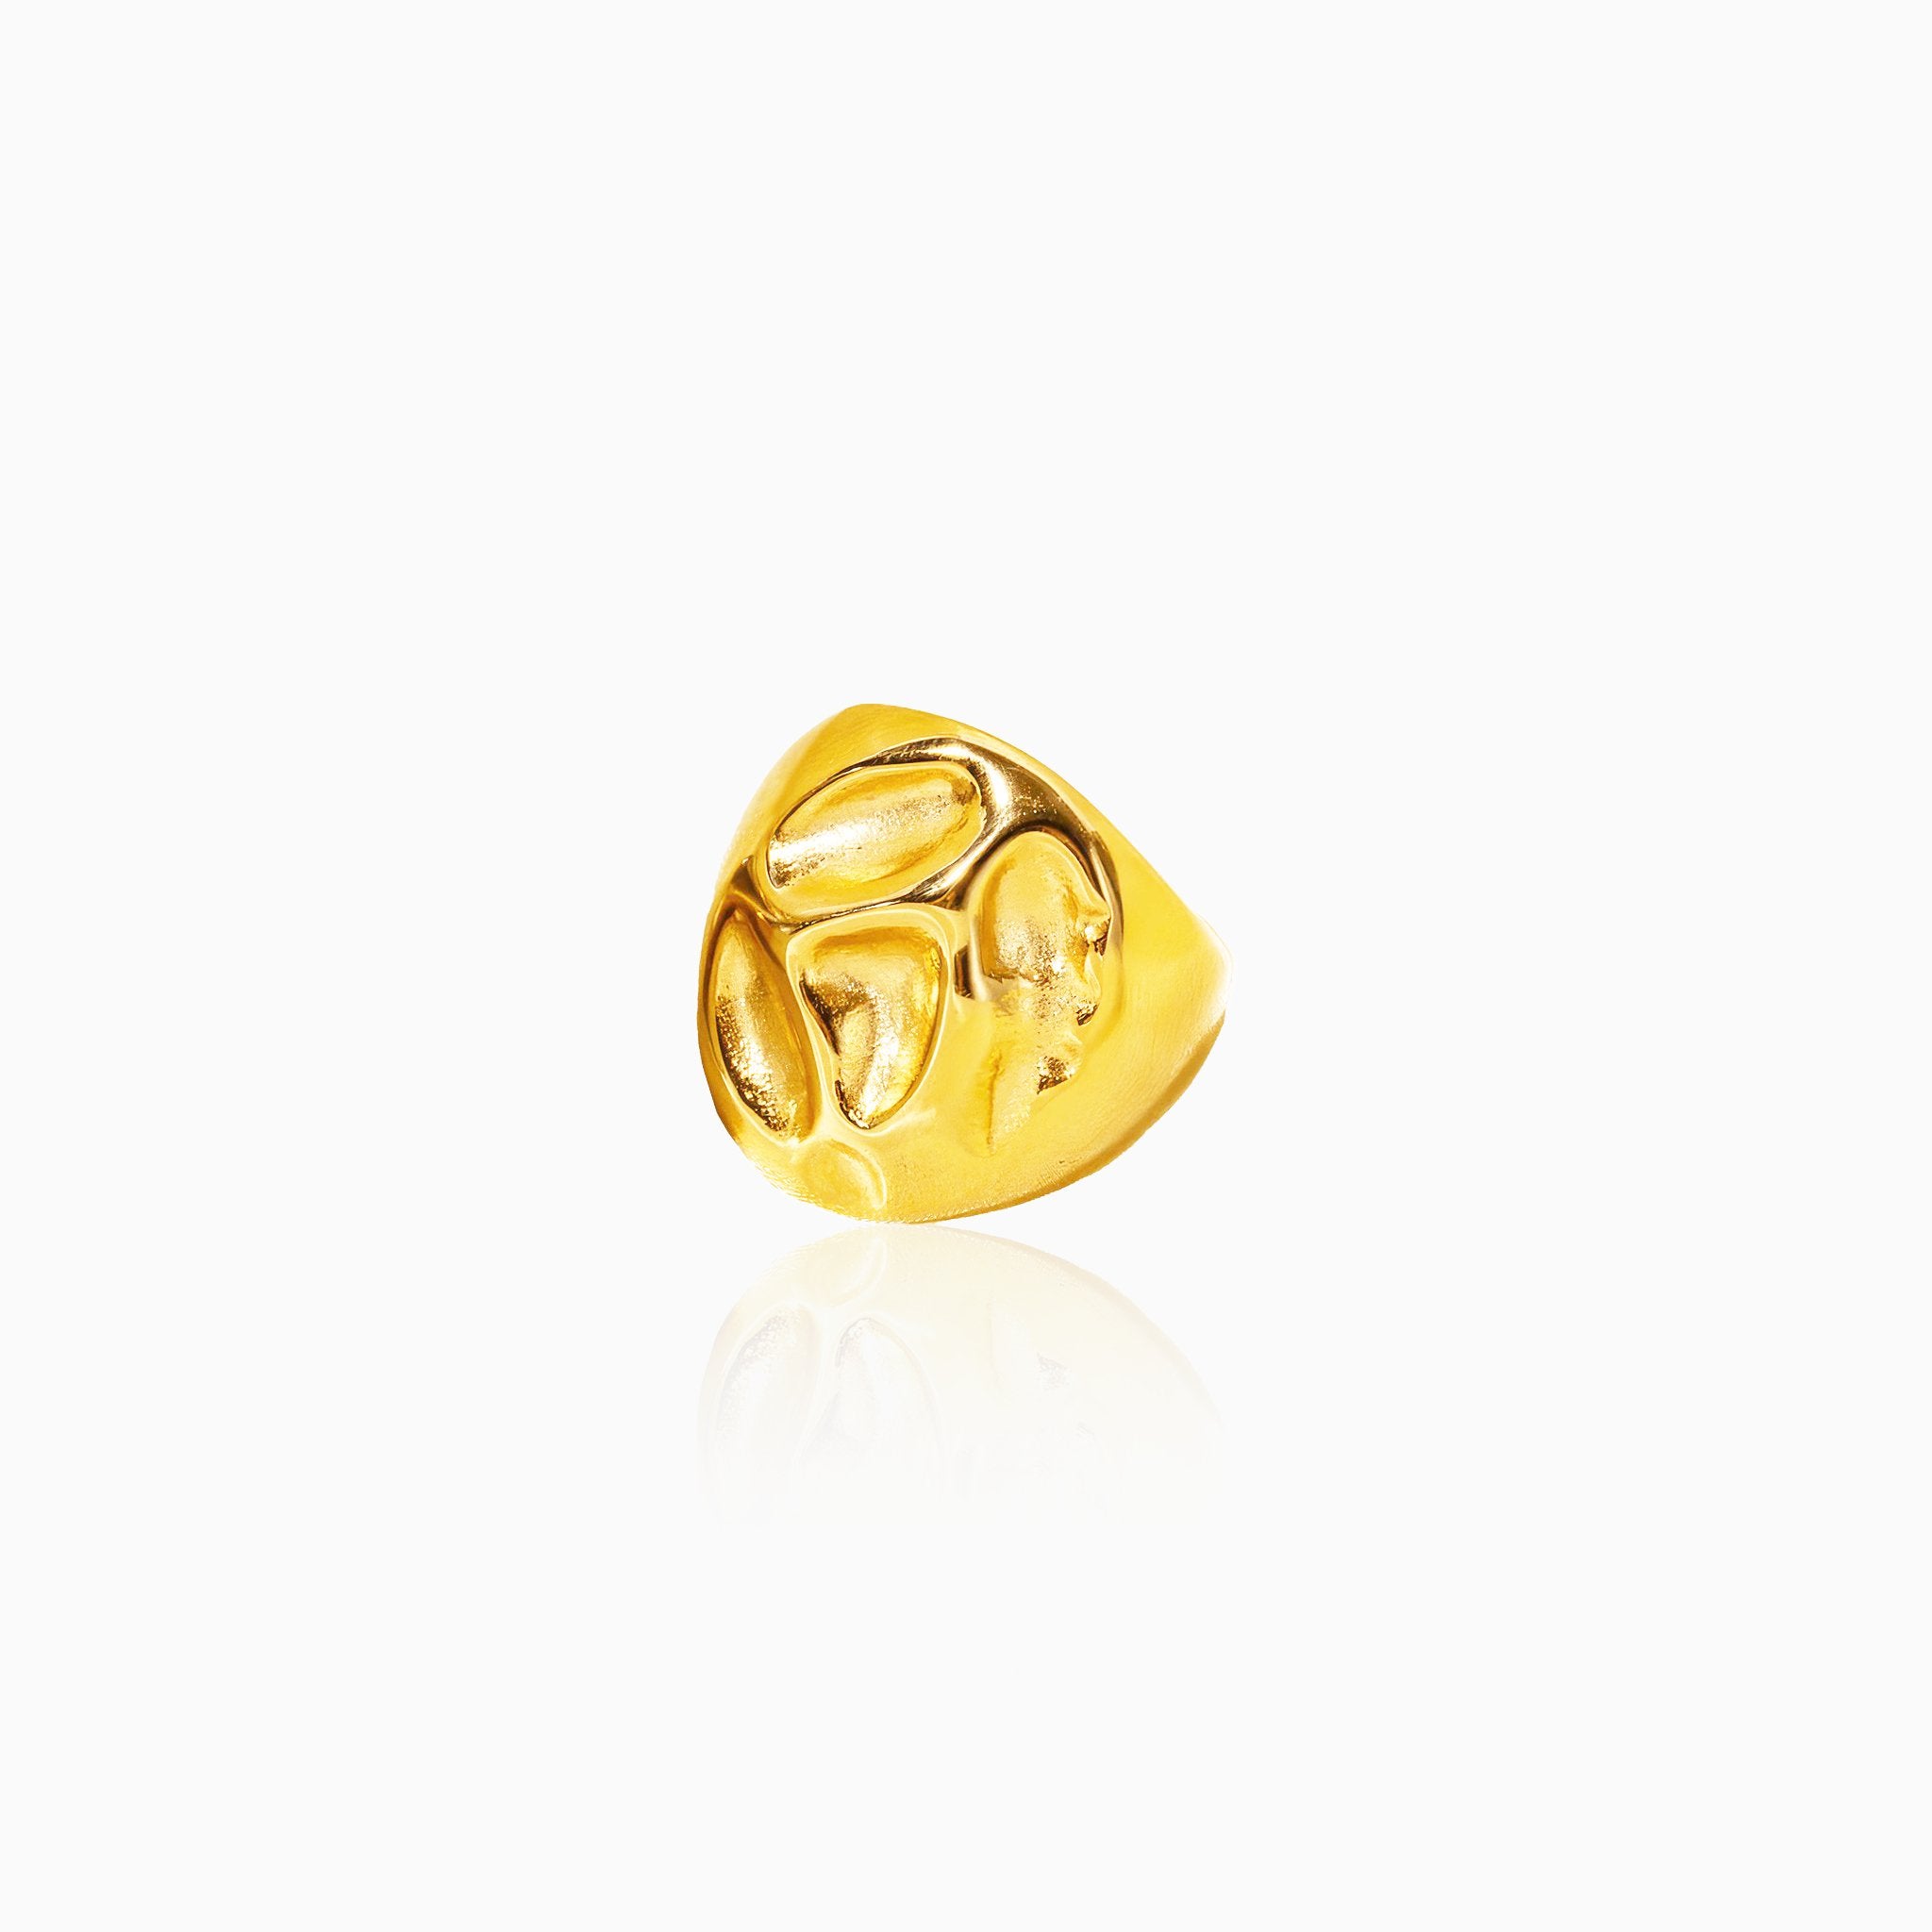 Lava Debossed Versatile Ring - Nobbier - Ring - 18K Gold And Titanium PVD Coated Jewelry